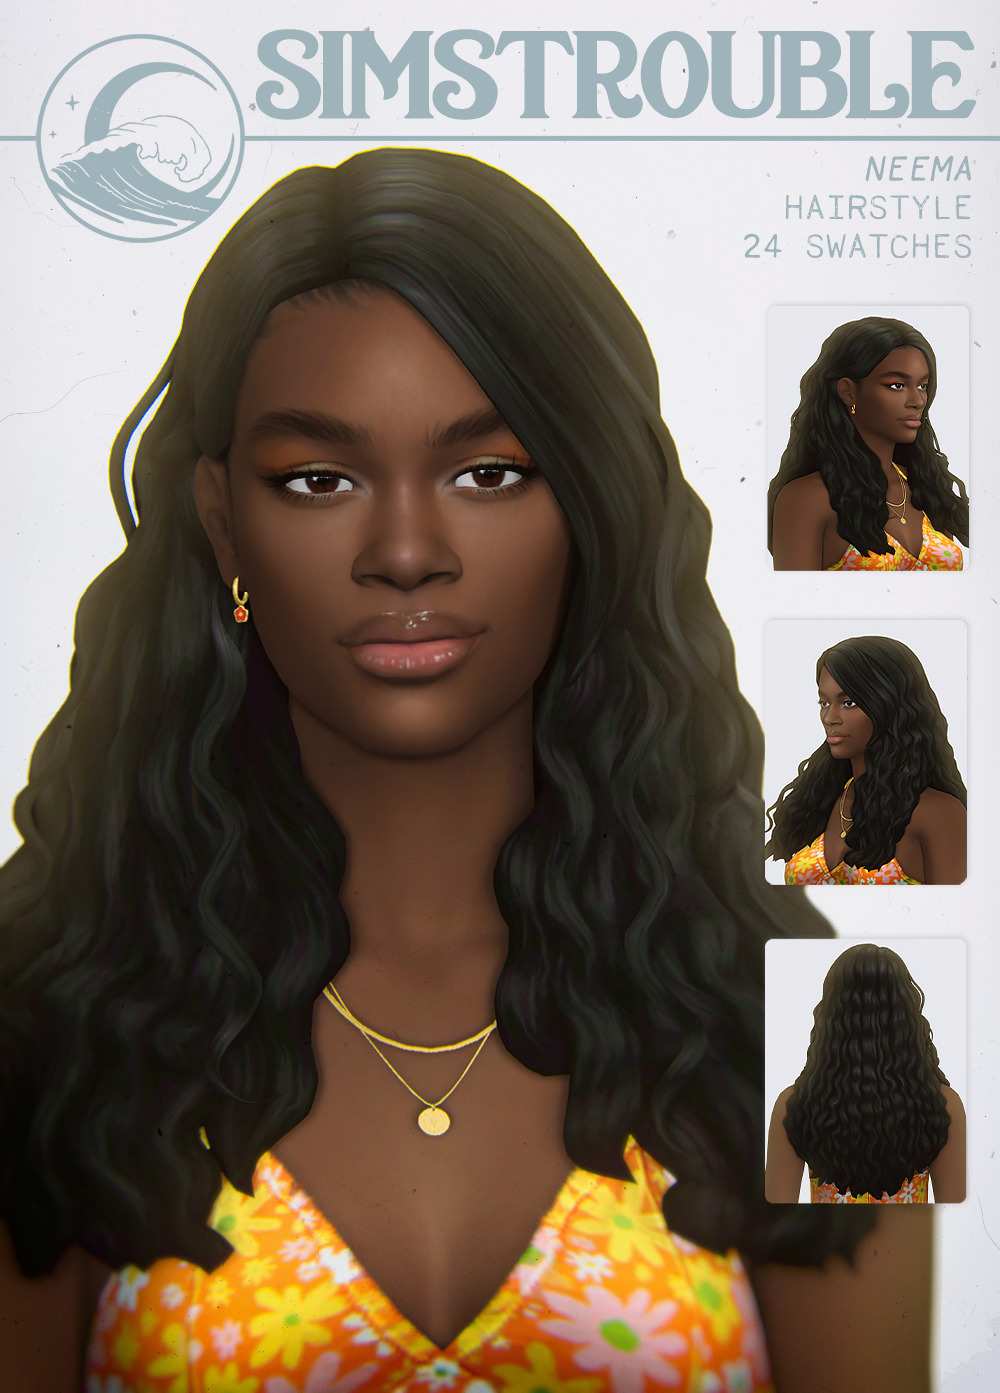 NEEMA by simstroubleNo excuses, curls are just fun to make…